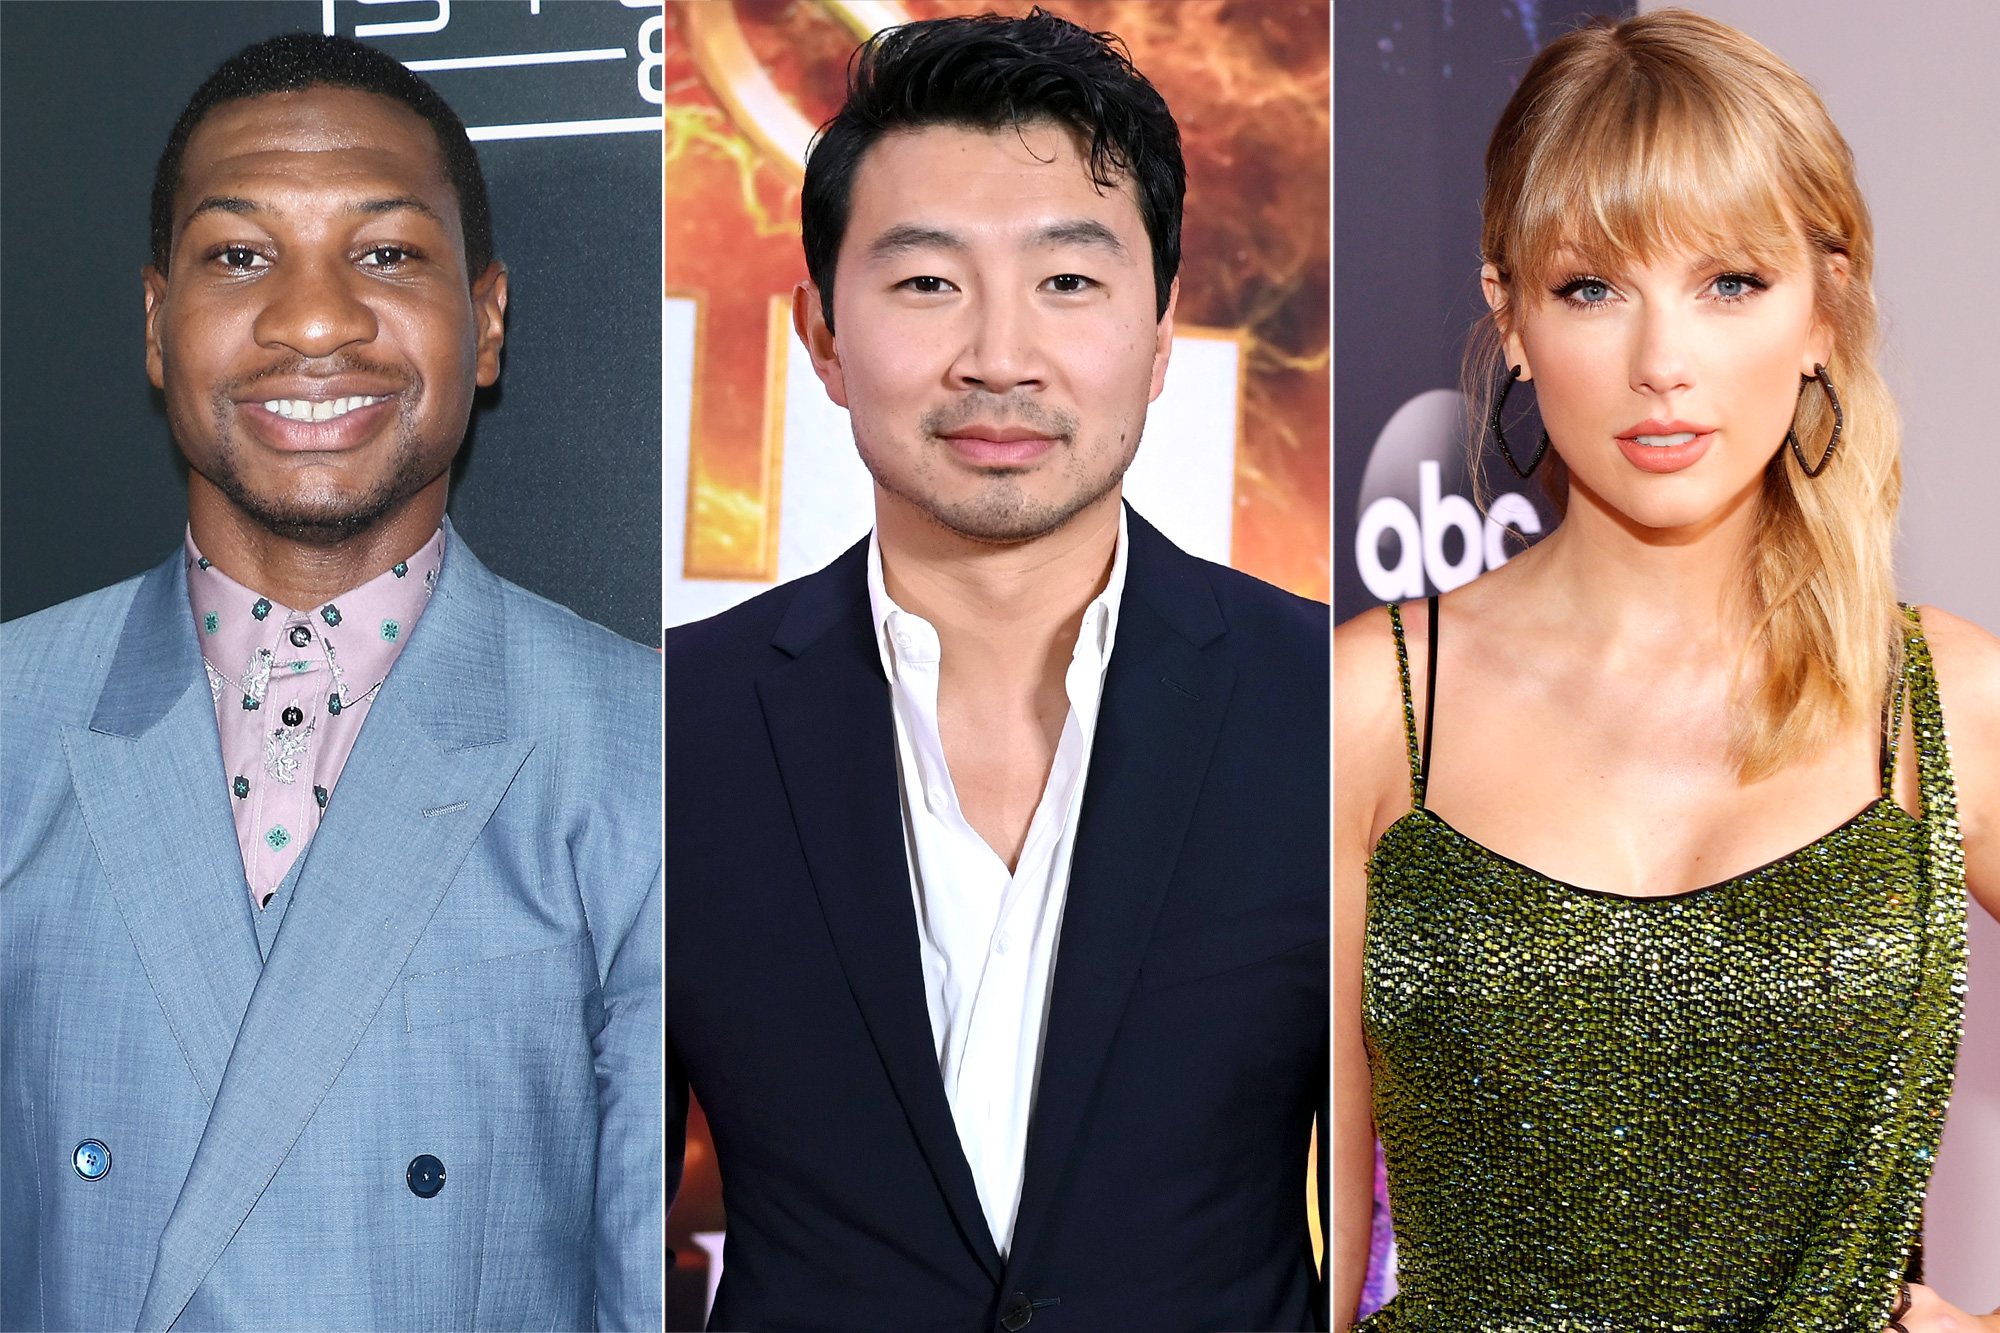 Jonathan Majors, Simu Liu will host ‘Saturday Night Live’; Taylor Swift to come back as a musical guest